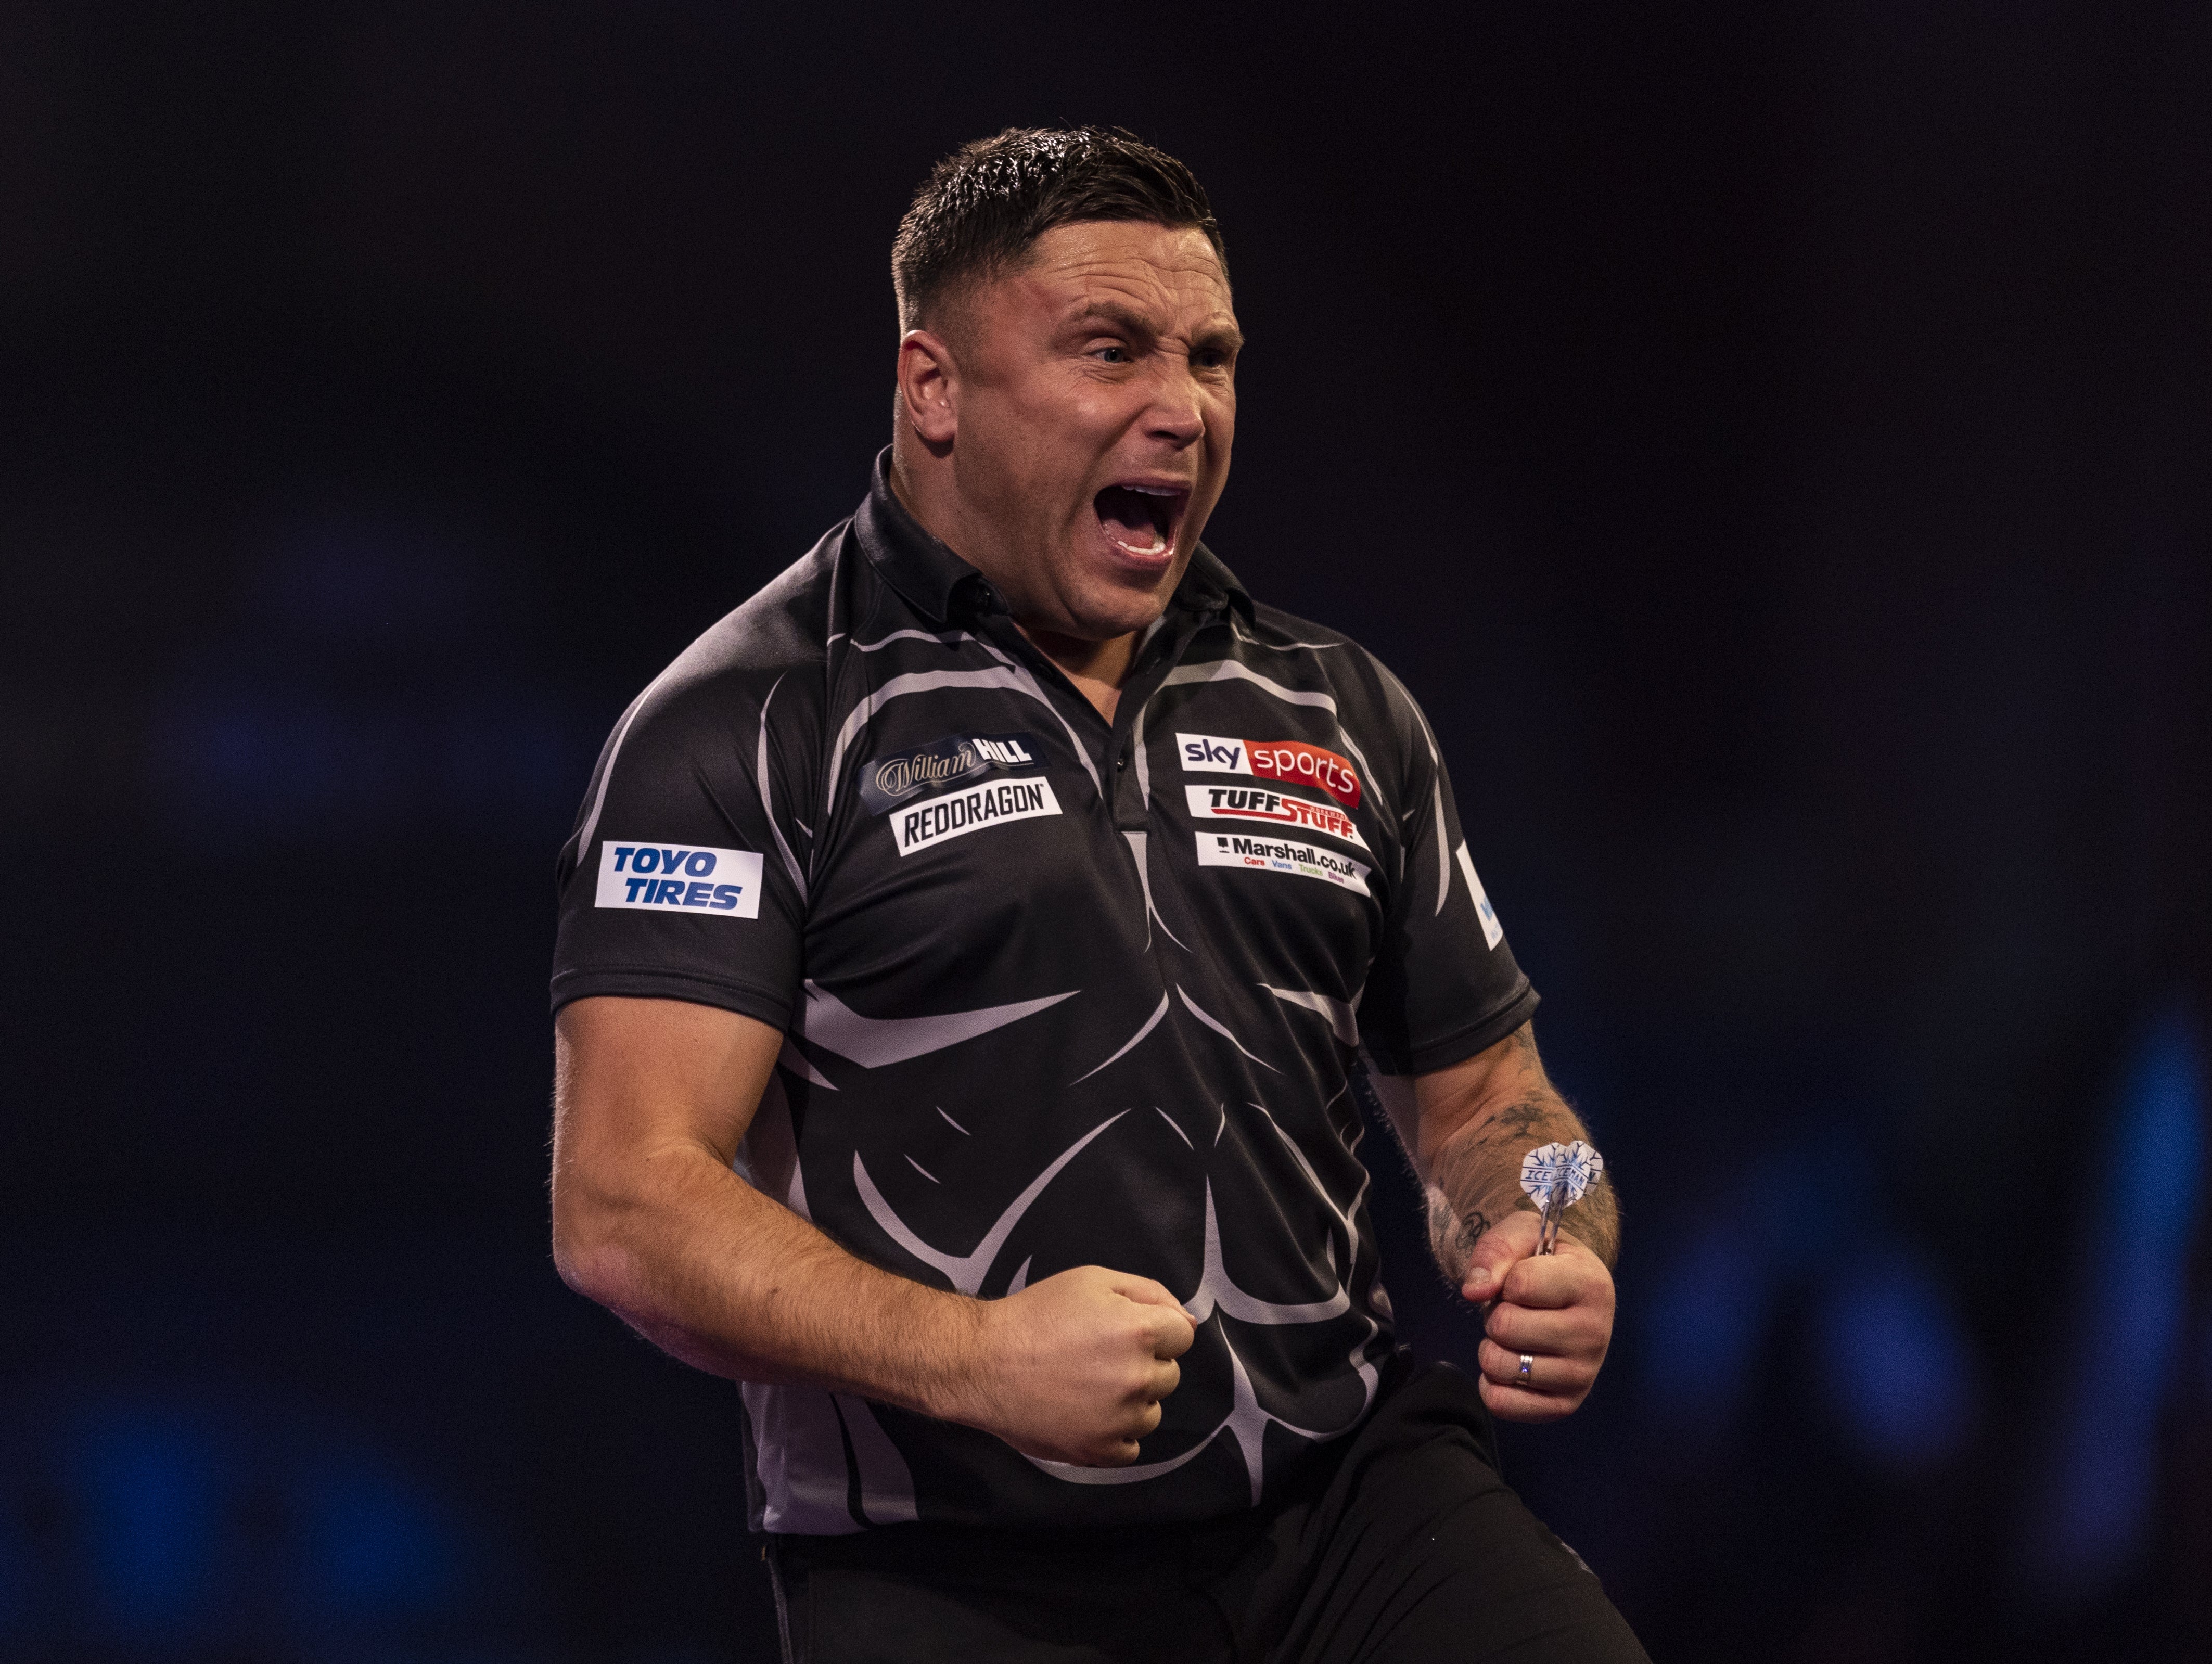 Wales’ Gerwyn Price has reached the semi-finals of the World Matchplay for the first time (Steven Paston/PA)